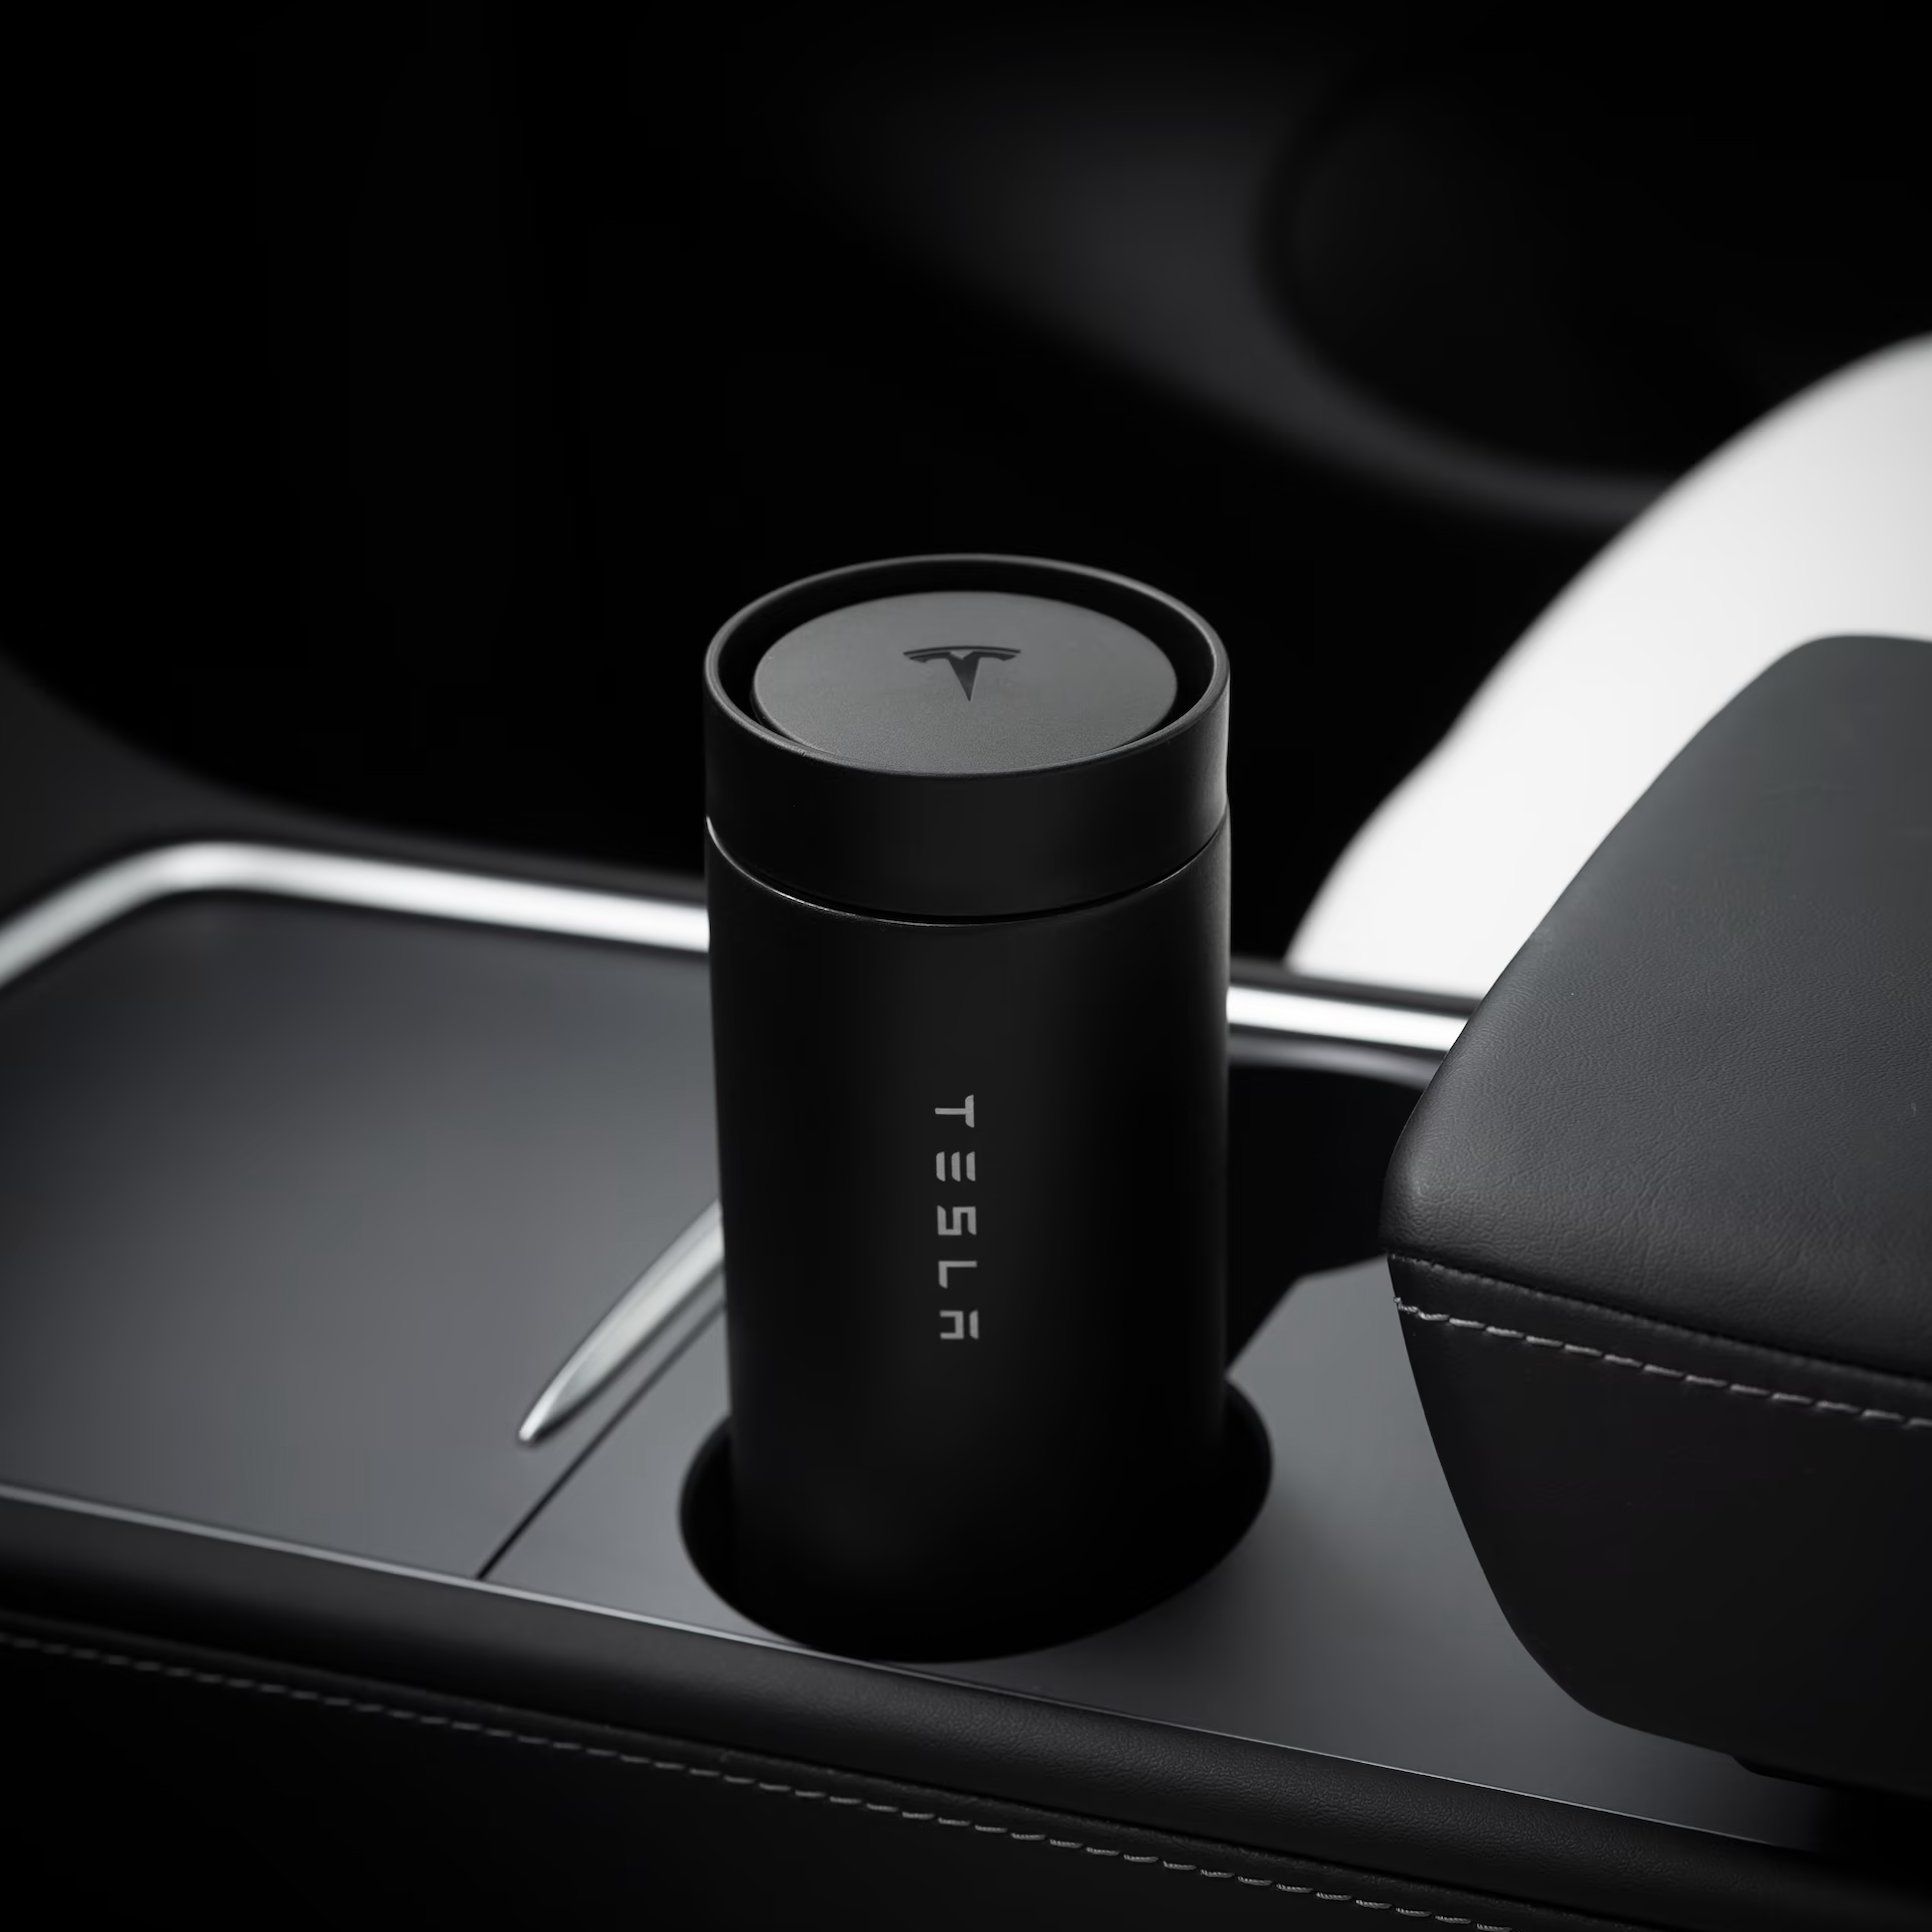 Sawyer Merritt on X: NEWS: @Tesla has launched three new items in its  online store: • On the Road Vessel: $35 • On the Road Tumbler: $32 • On the  Road Cup